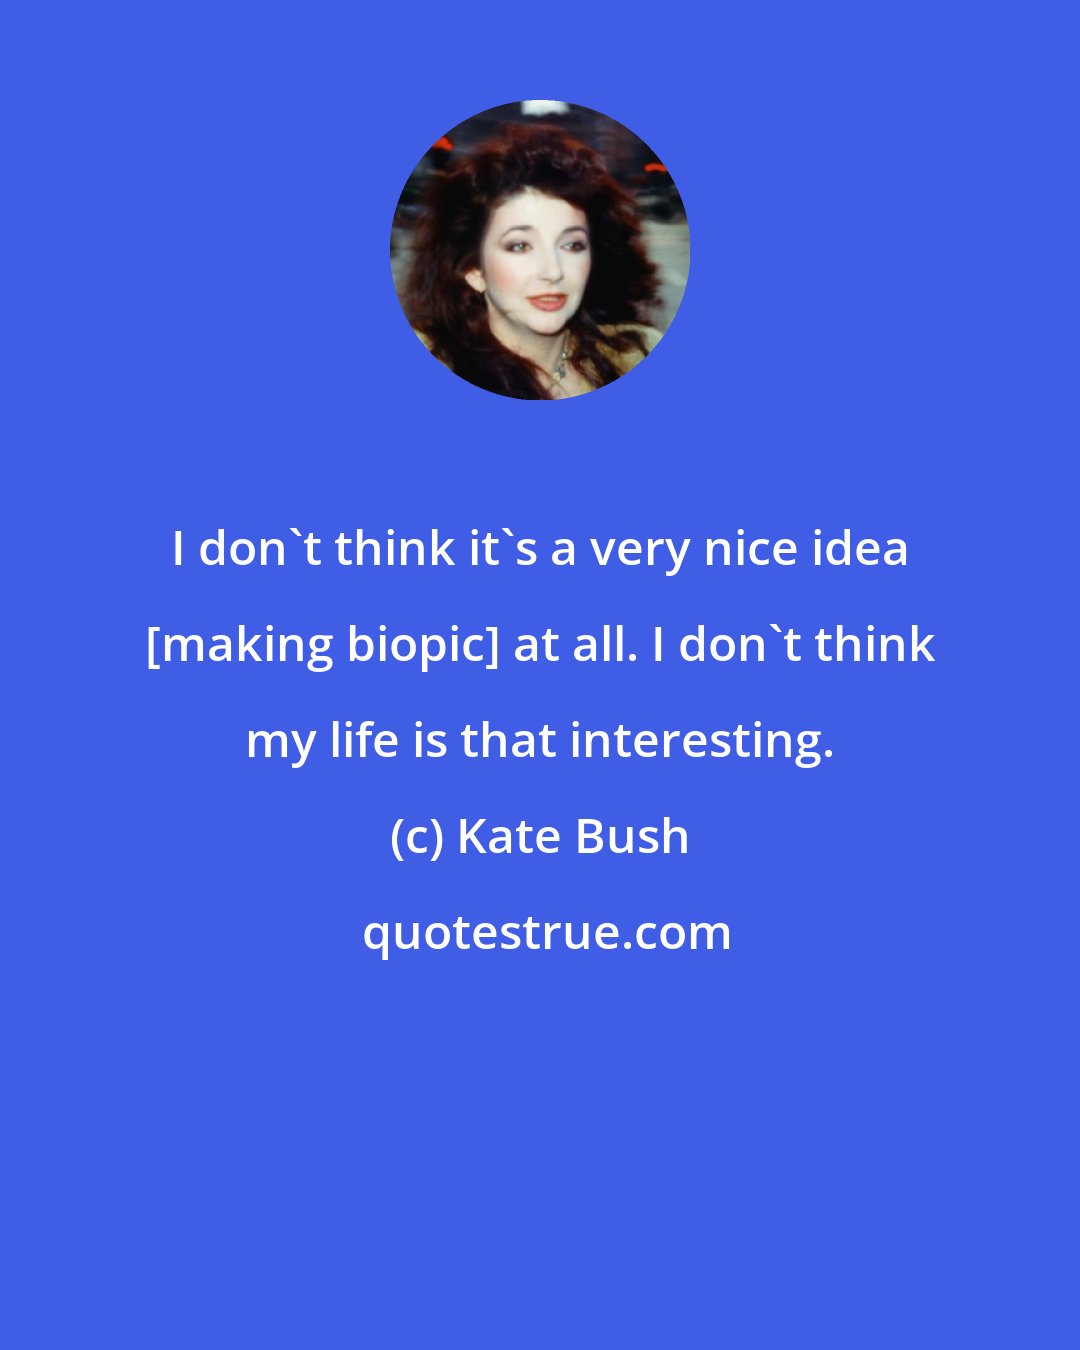 Kate Bush: I don't think it's a very nice idea [making biopic] at all. I don't think my life is that interesting.